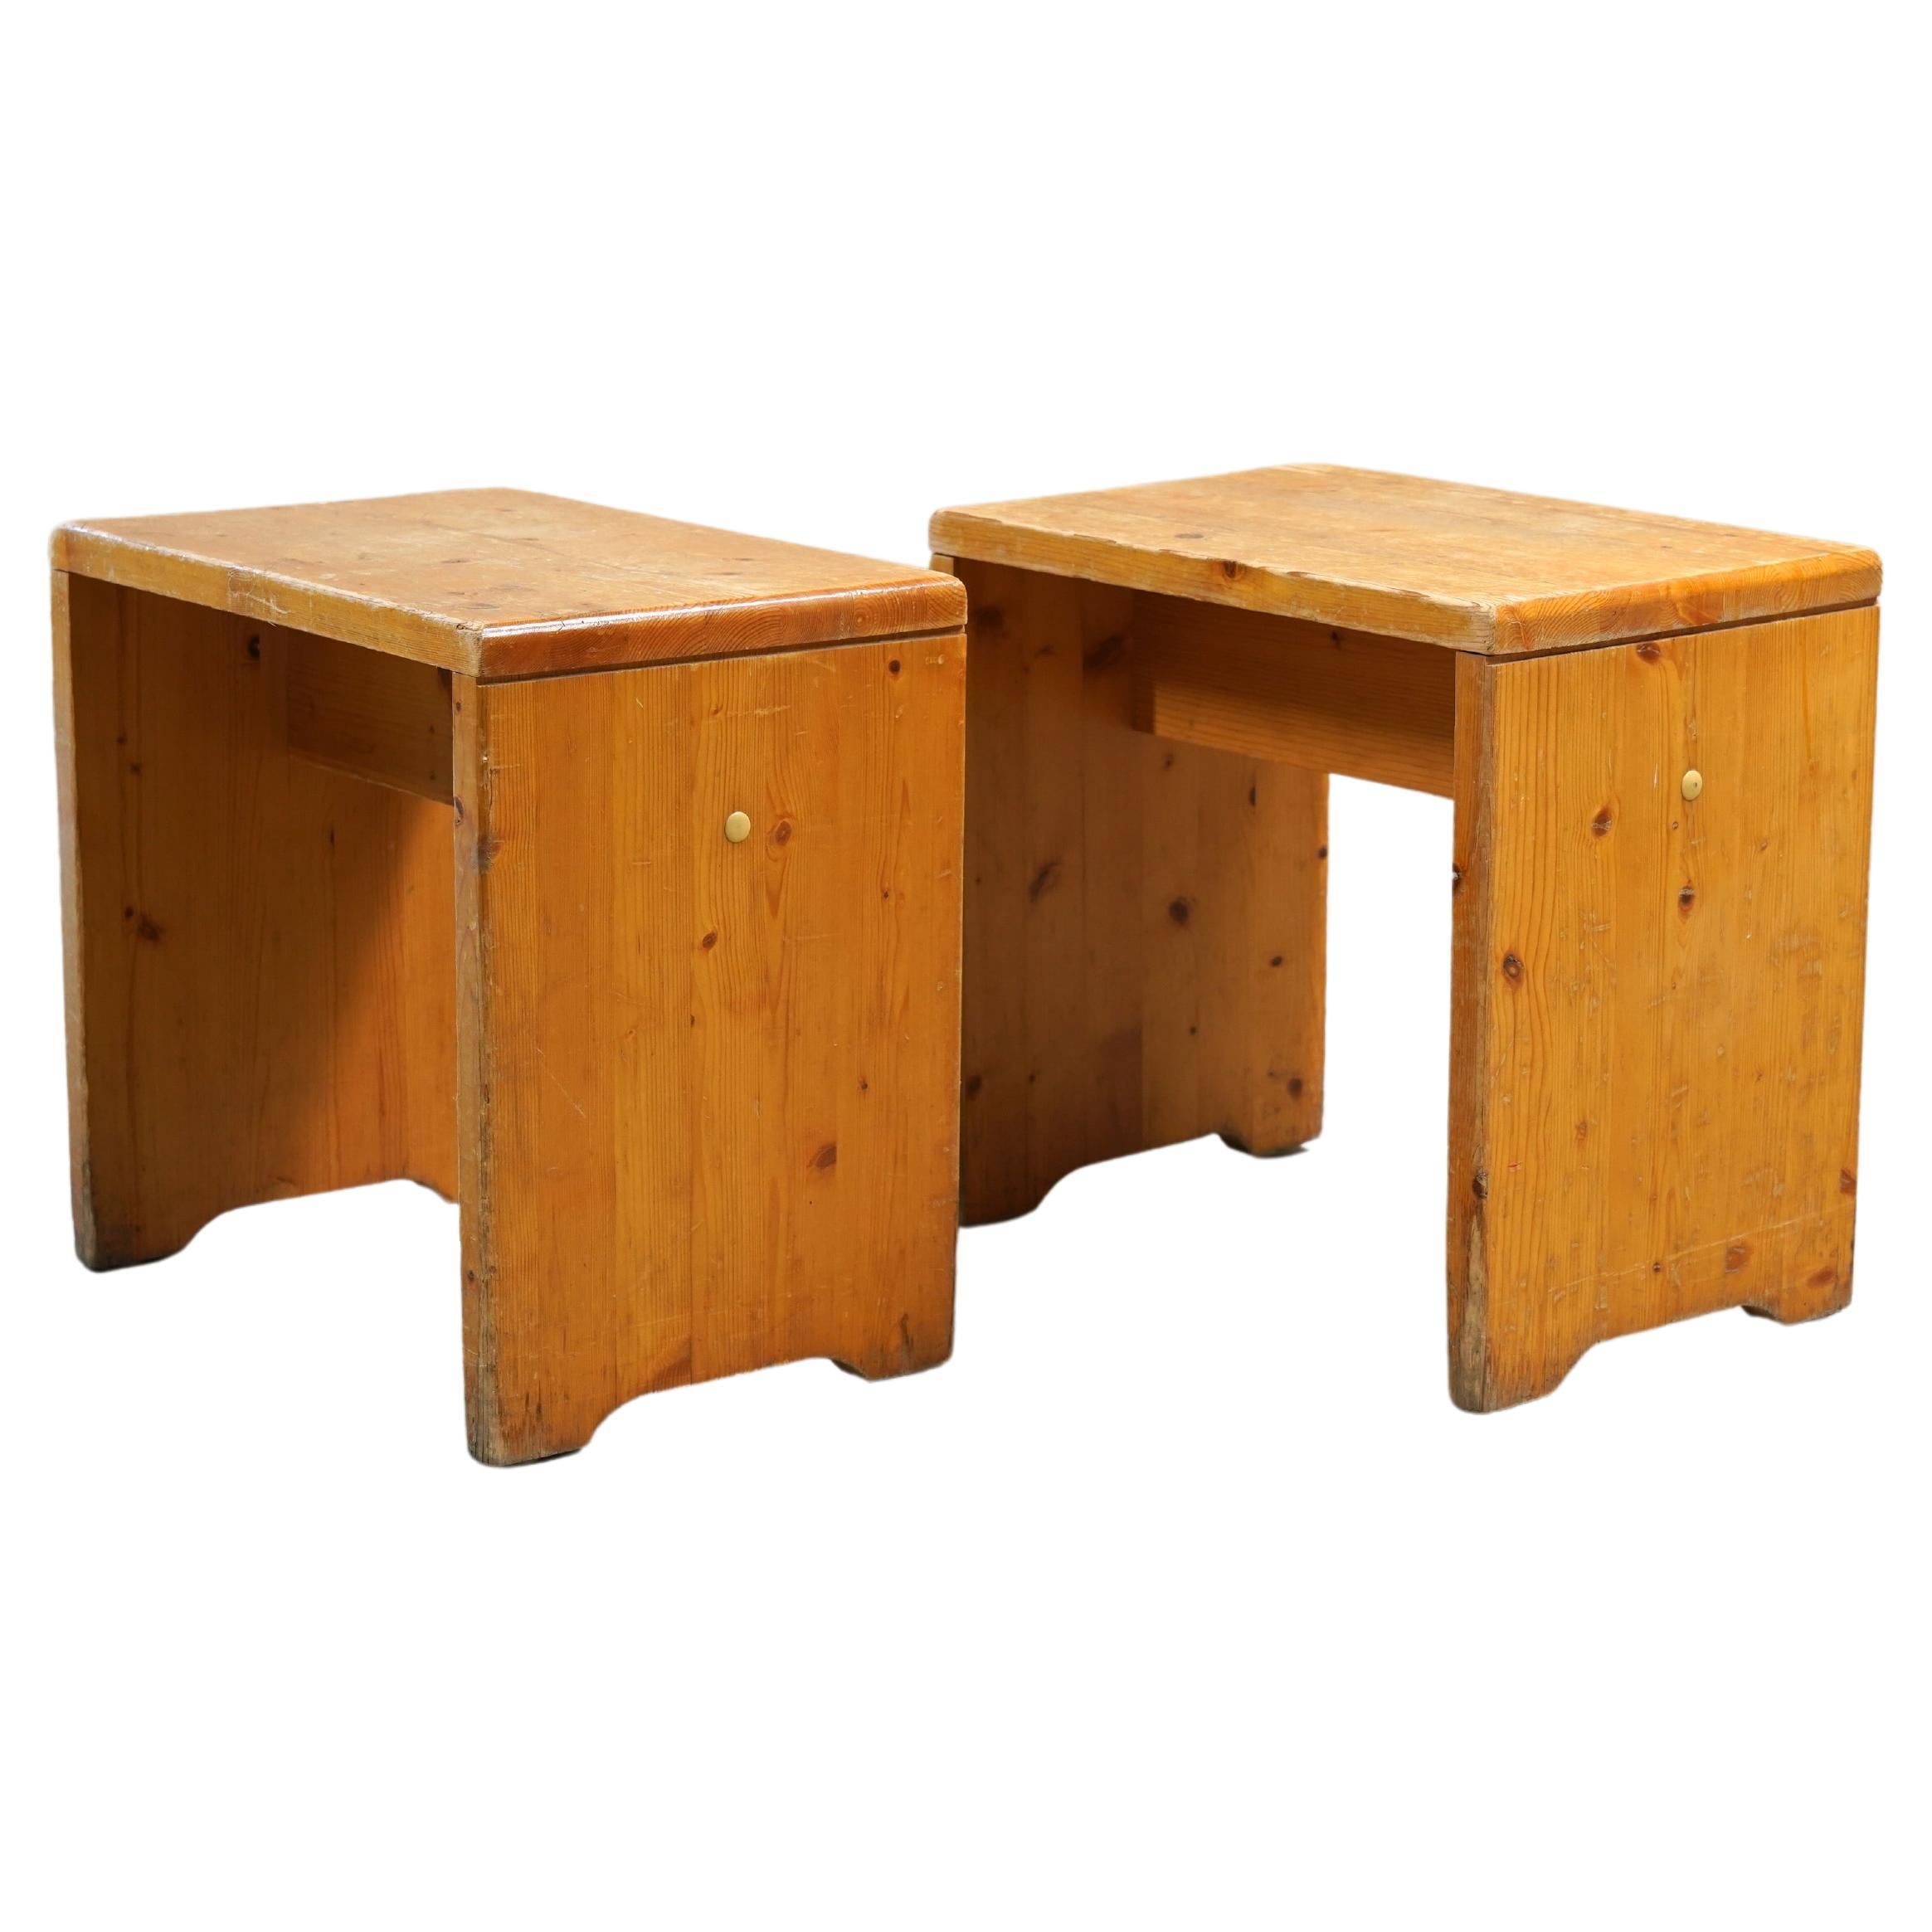 Charlotte Perriand Stools from Les Arcs, France circa 1968 (4 Available)